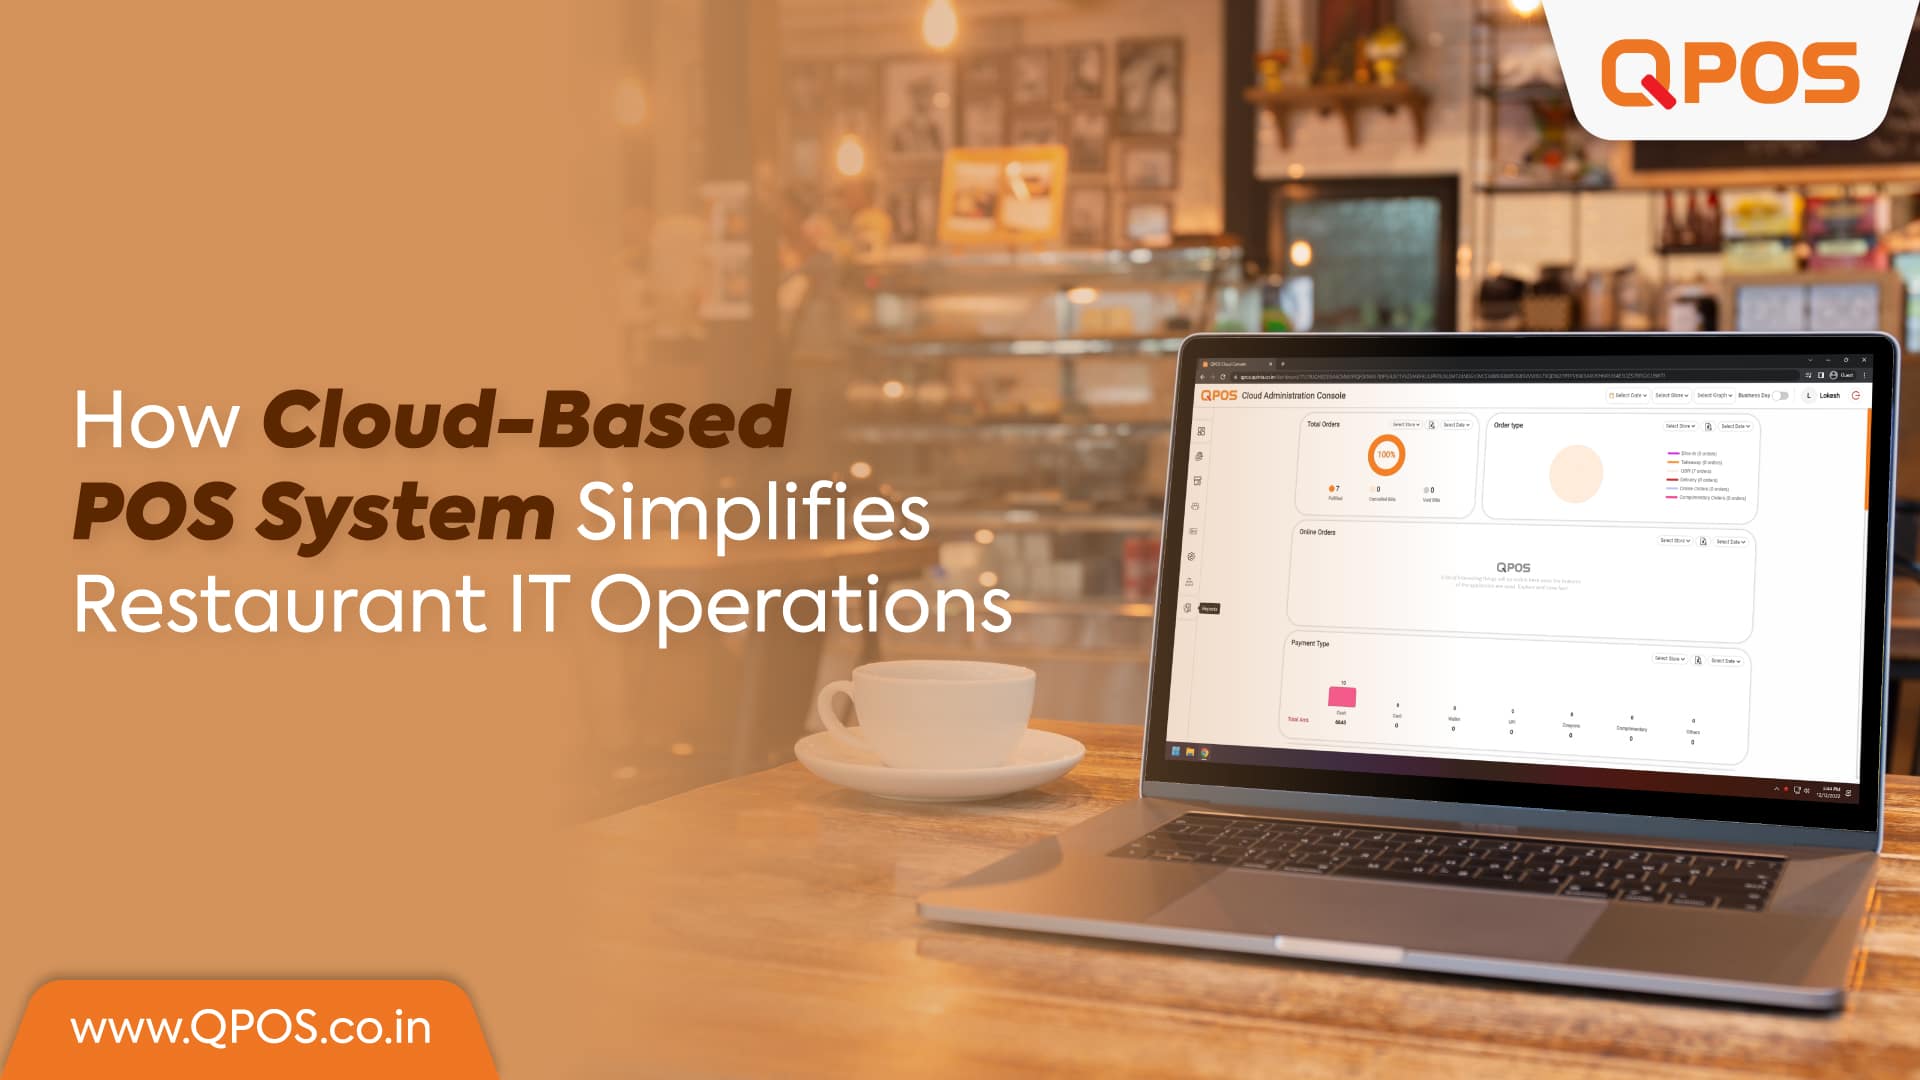 How Cloud-Based POS System Simplifies Restaurant IT Operations